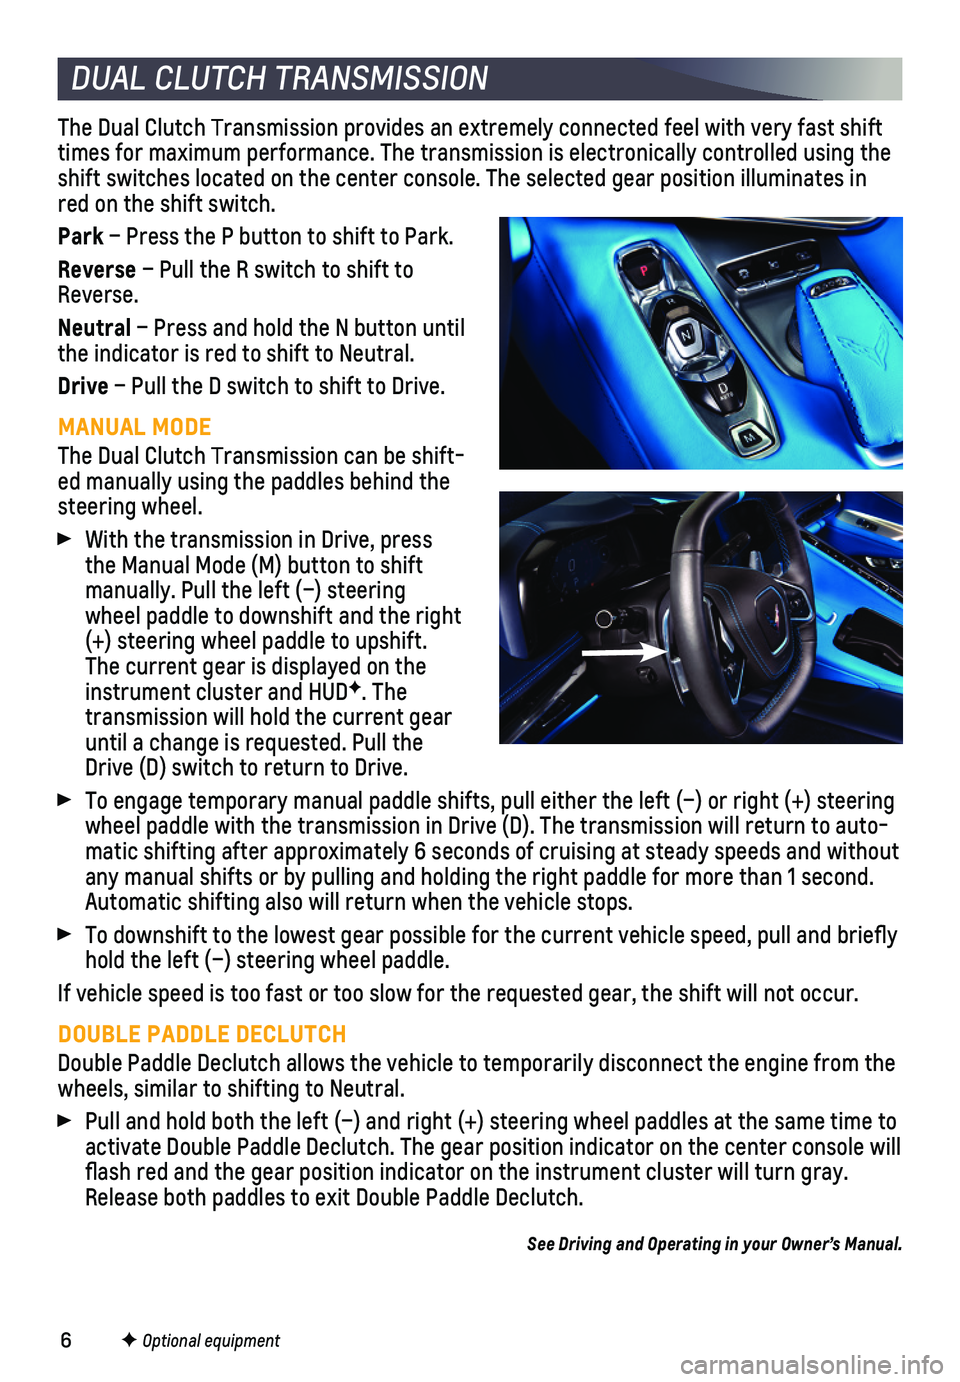 CHEVROLET CORVETTE 2021  Performance Get To Know Guide 6
DUAL CLUTCH TRANSMISSION
The Dual Clutch Transmission provides an extremely connected feel with very fast shift times for maximum performance. The transmission is electronically contro\
lled using t